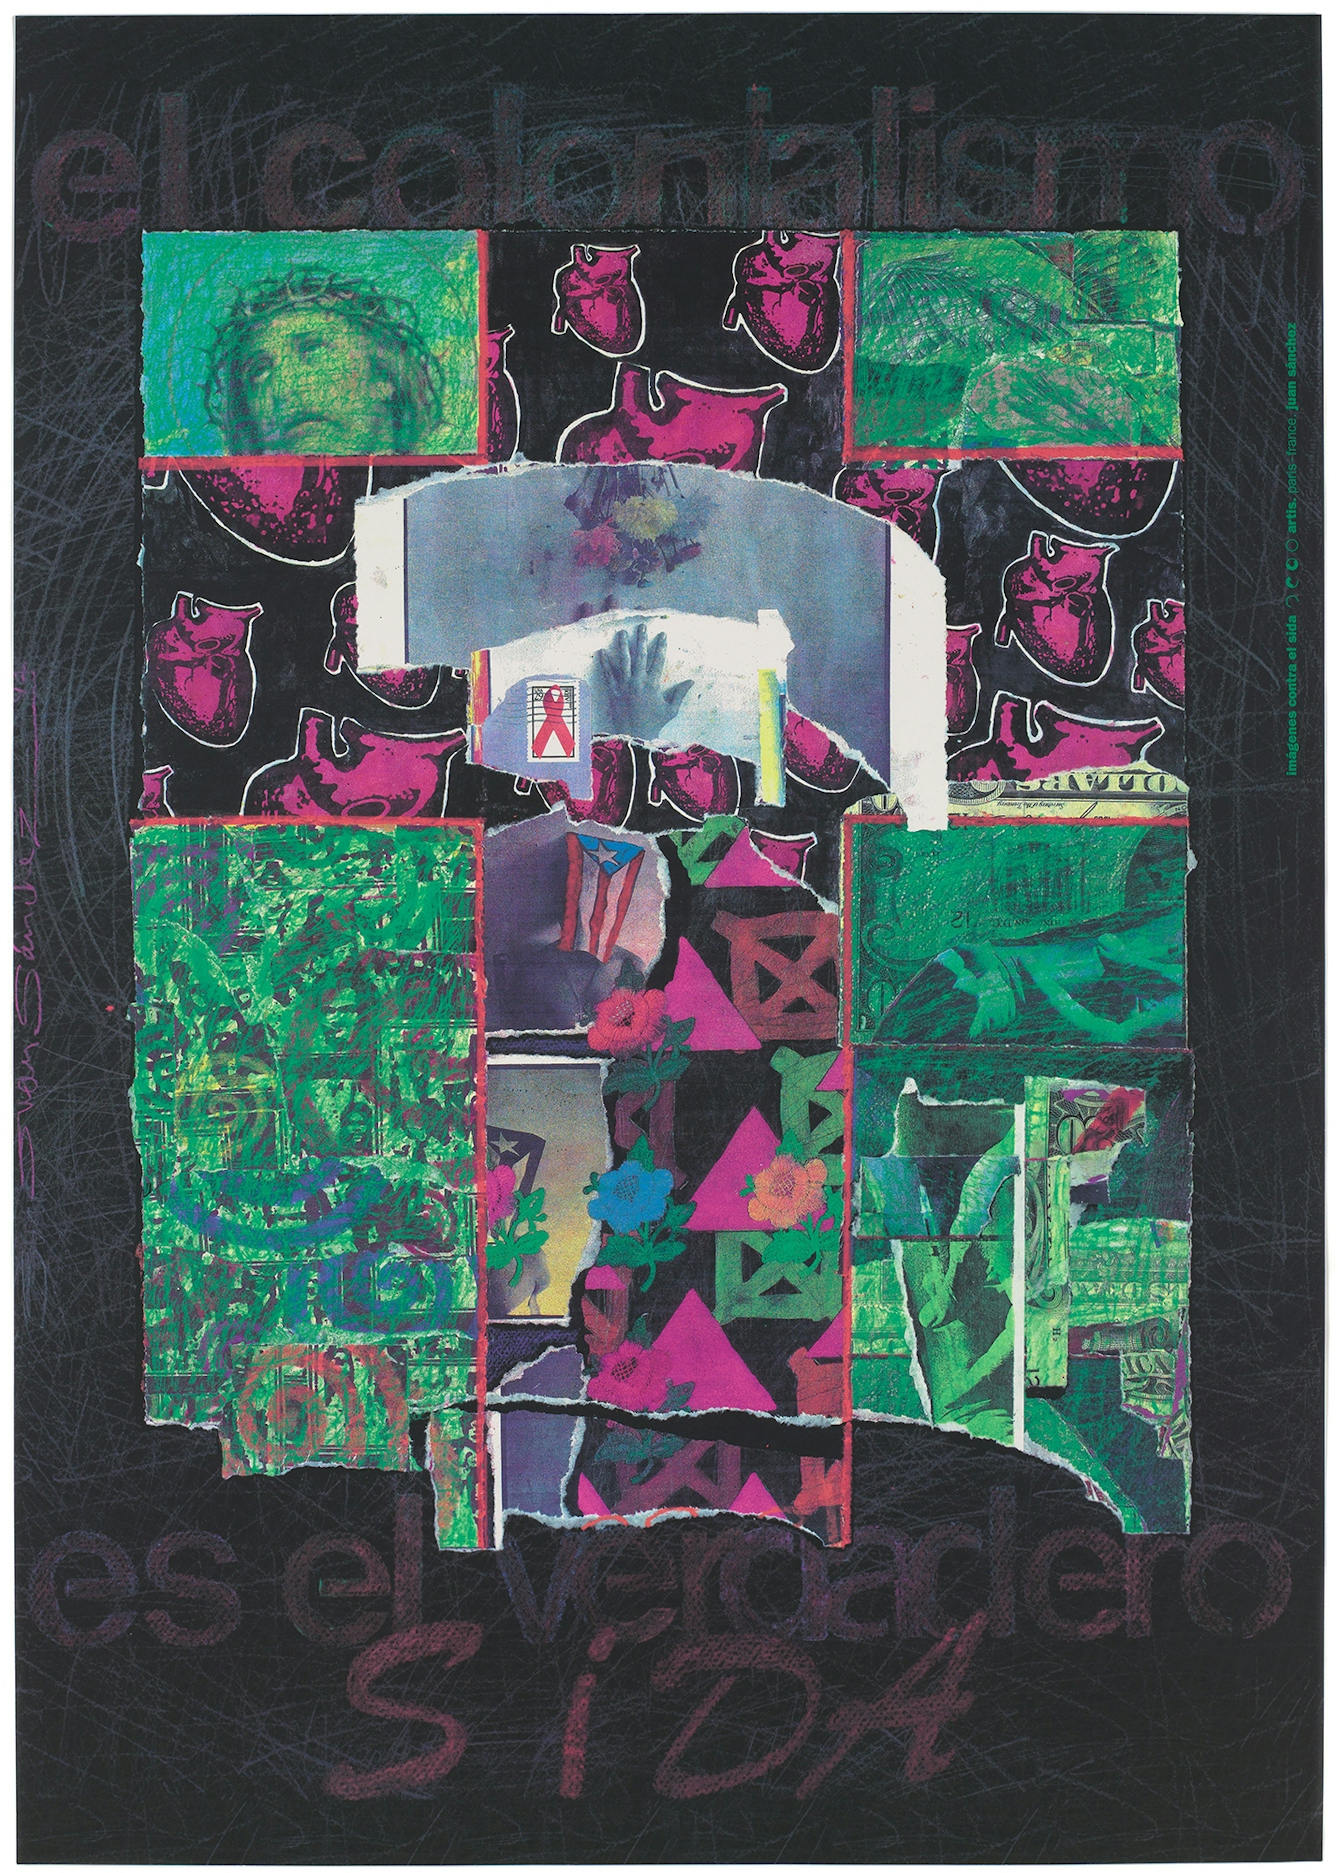 A montage of pink and green images mimicing torn paper. Images include pink triangles, heards, an AIDS campaign ribbon, the head of Jesus Christ, graffitti and an dollar bill. Above and below the image in feint chsalky letters are the words "el colonialismo es el verdadero SIDA".